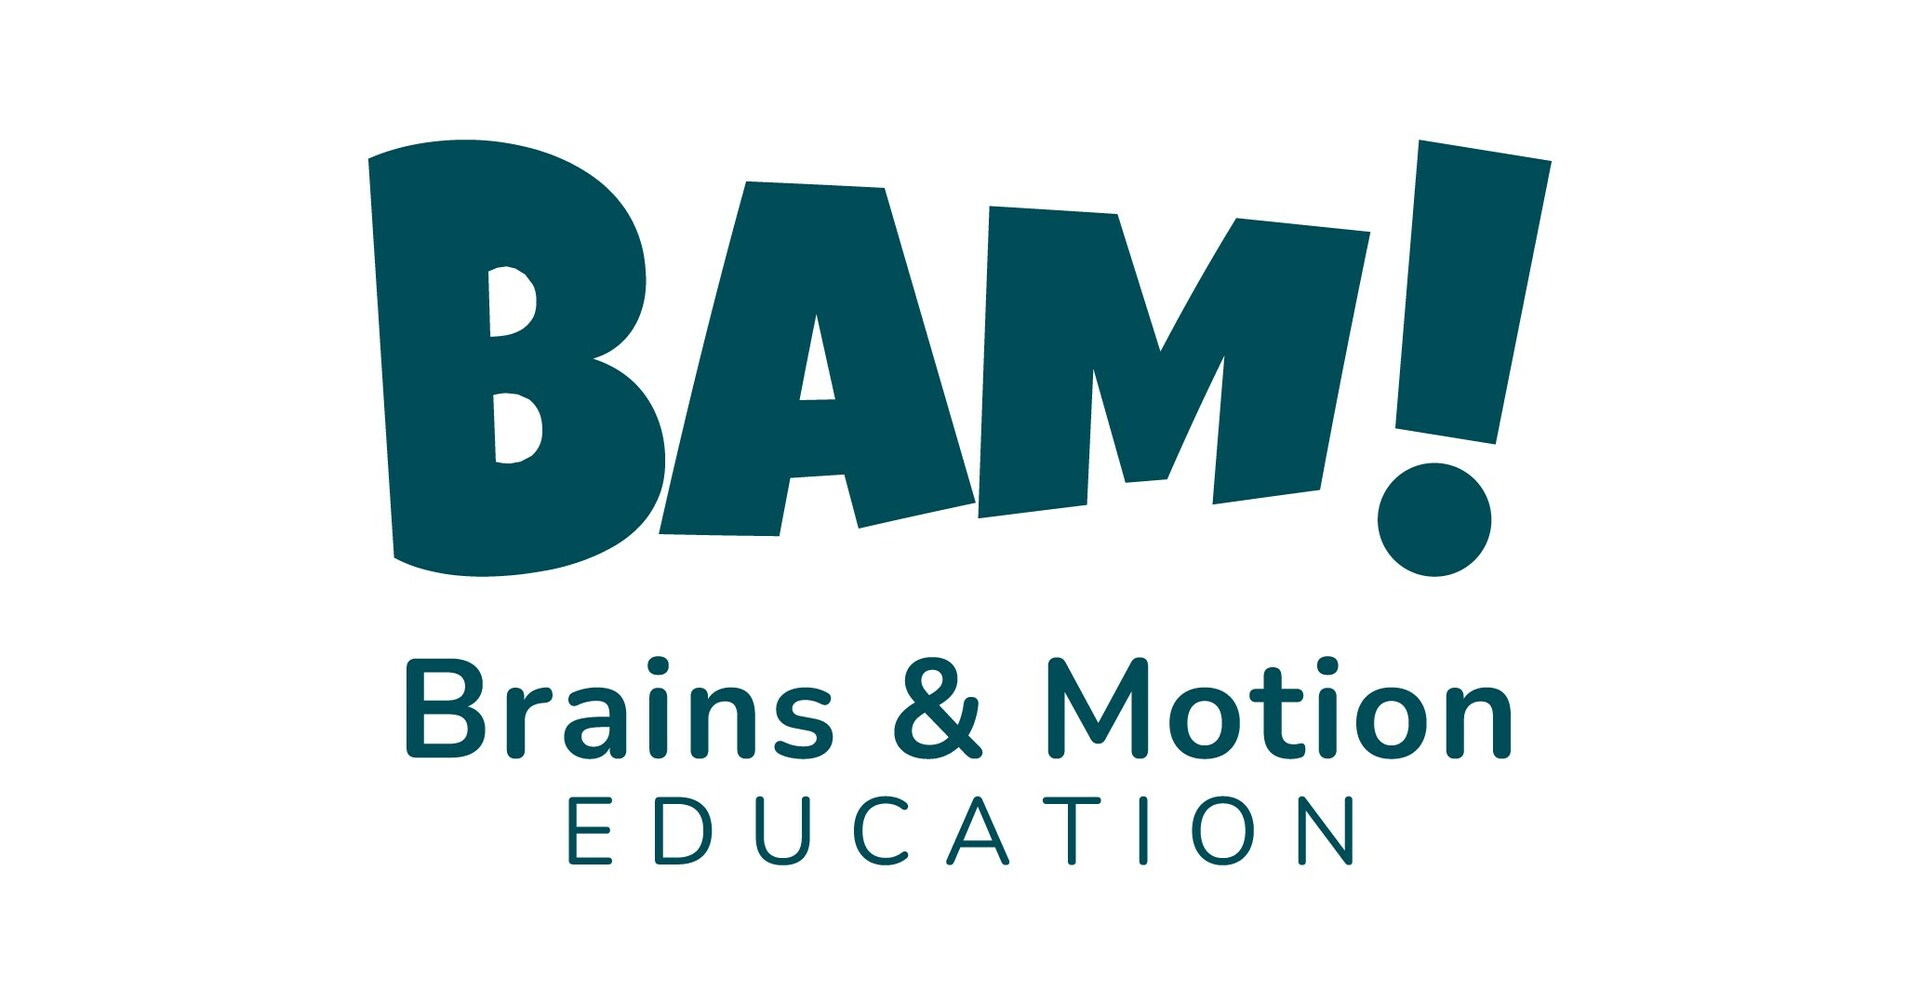 Brains and Motion Education